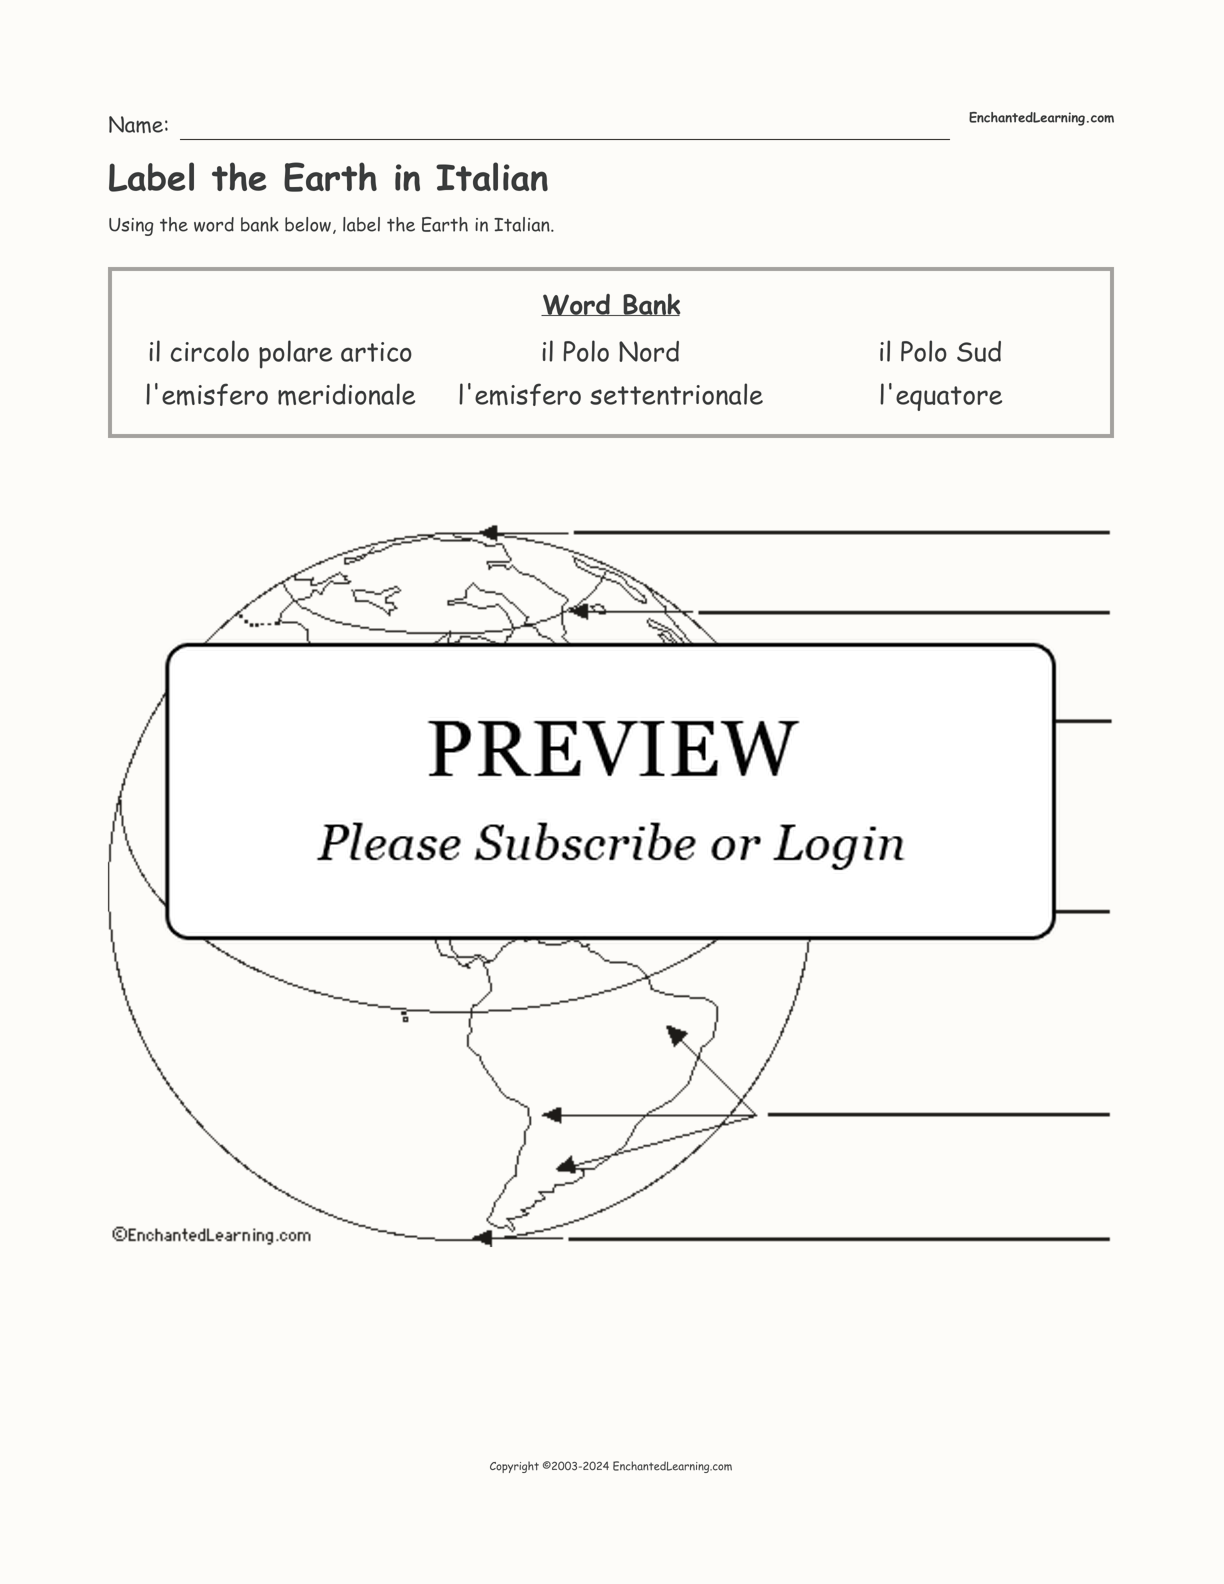 Label the Earth in Italian interactive worksheet page 1